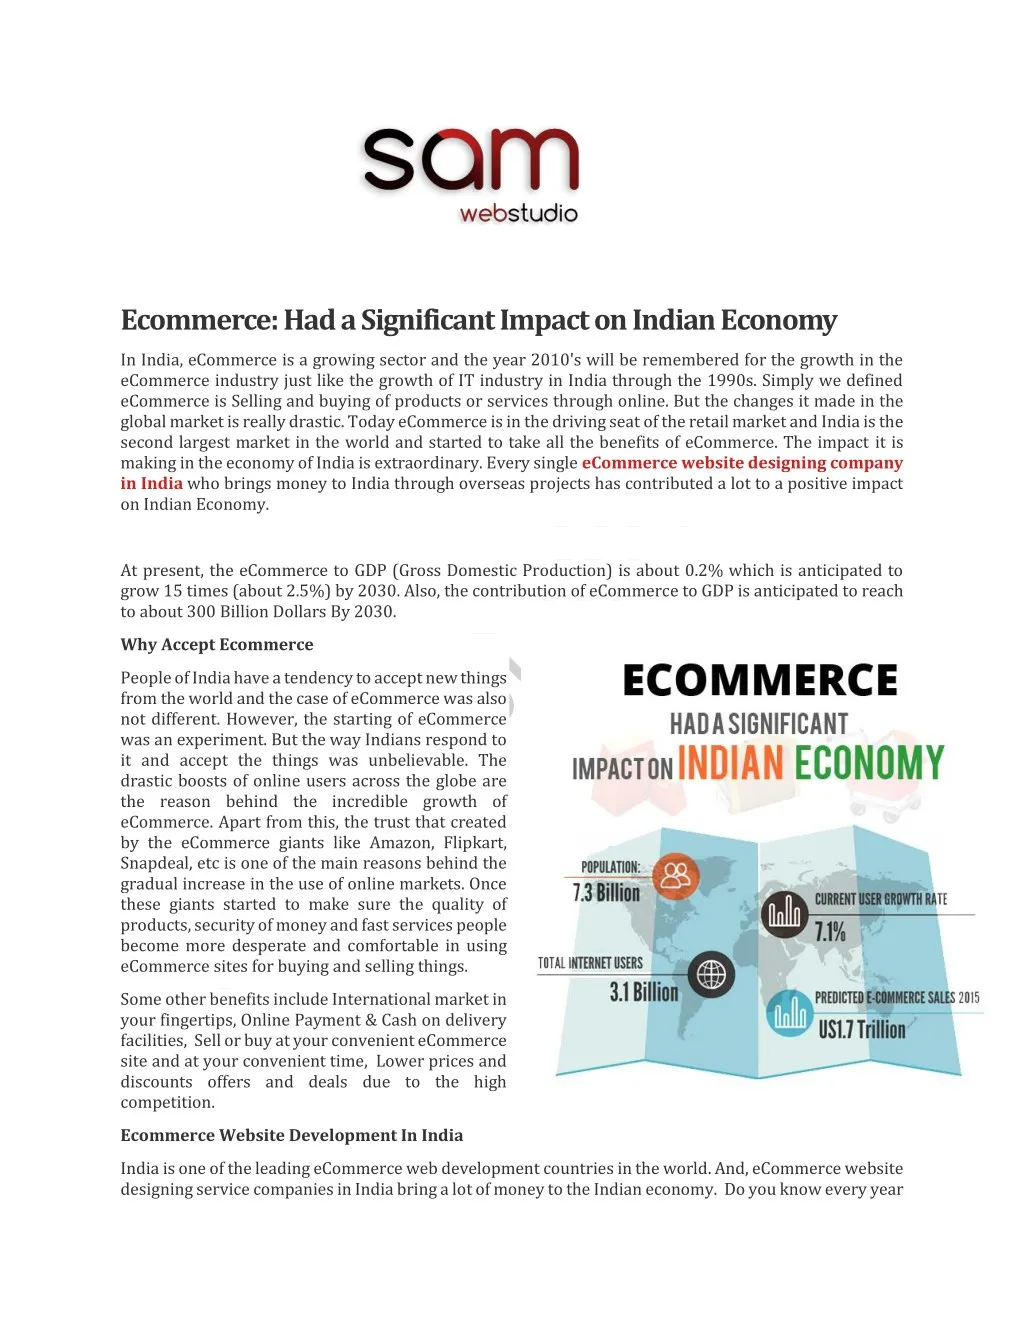 ecommerce had a significant impact on indian